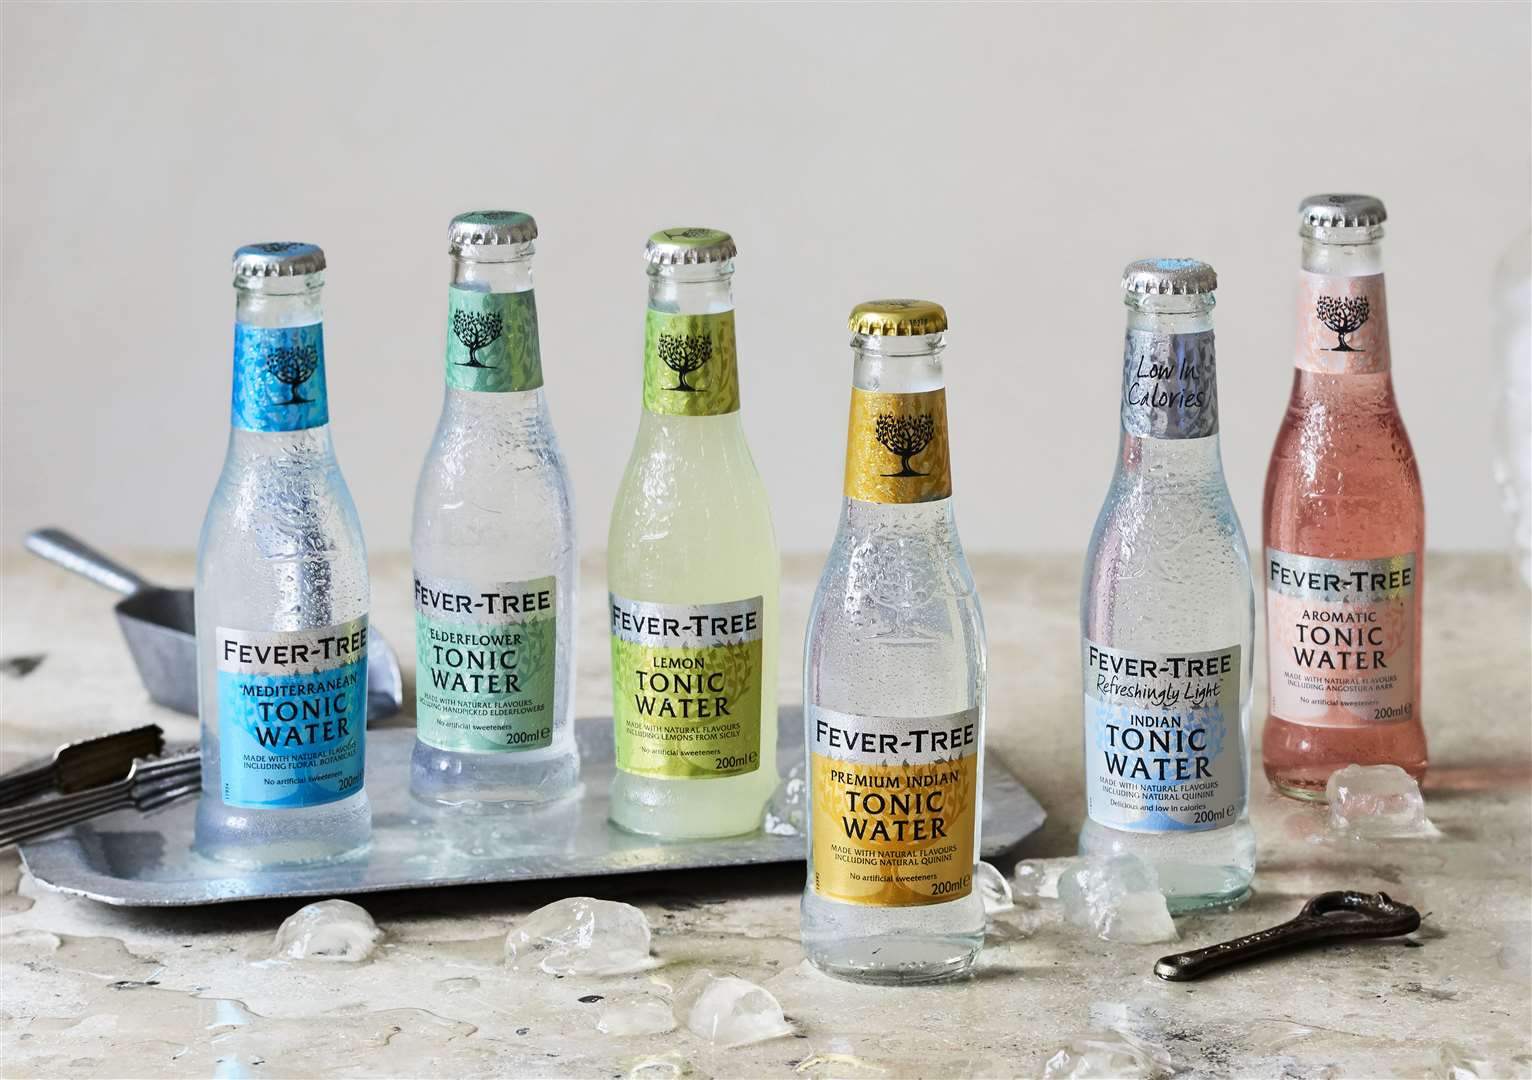 Fever-Tree reported higher sales after growth in the US (Fever-Tree/PA)